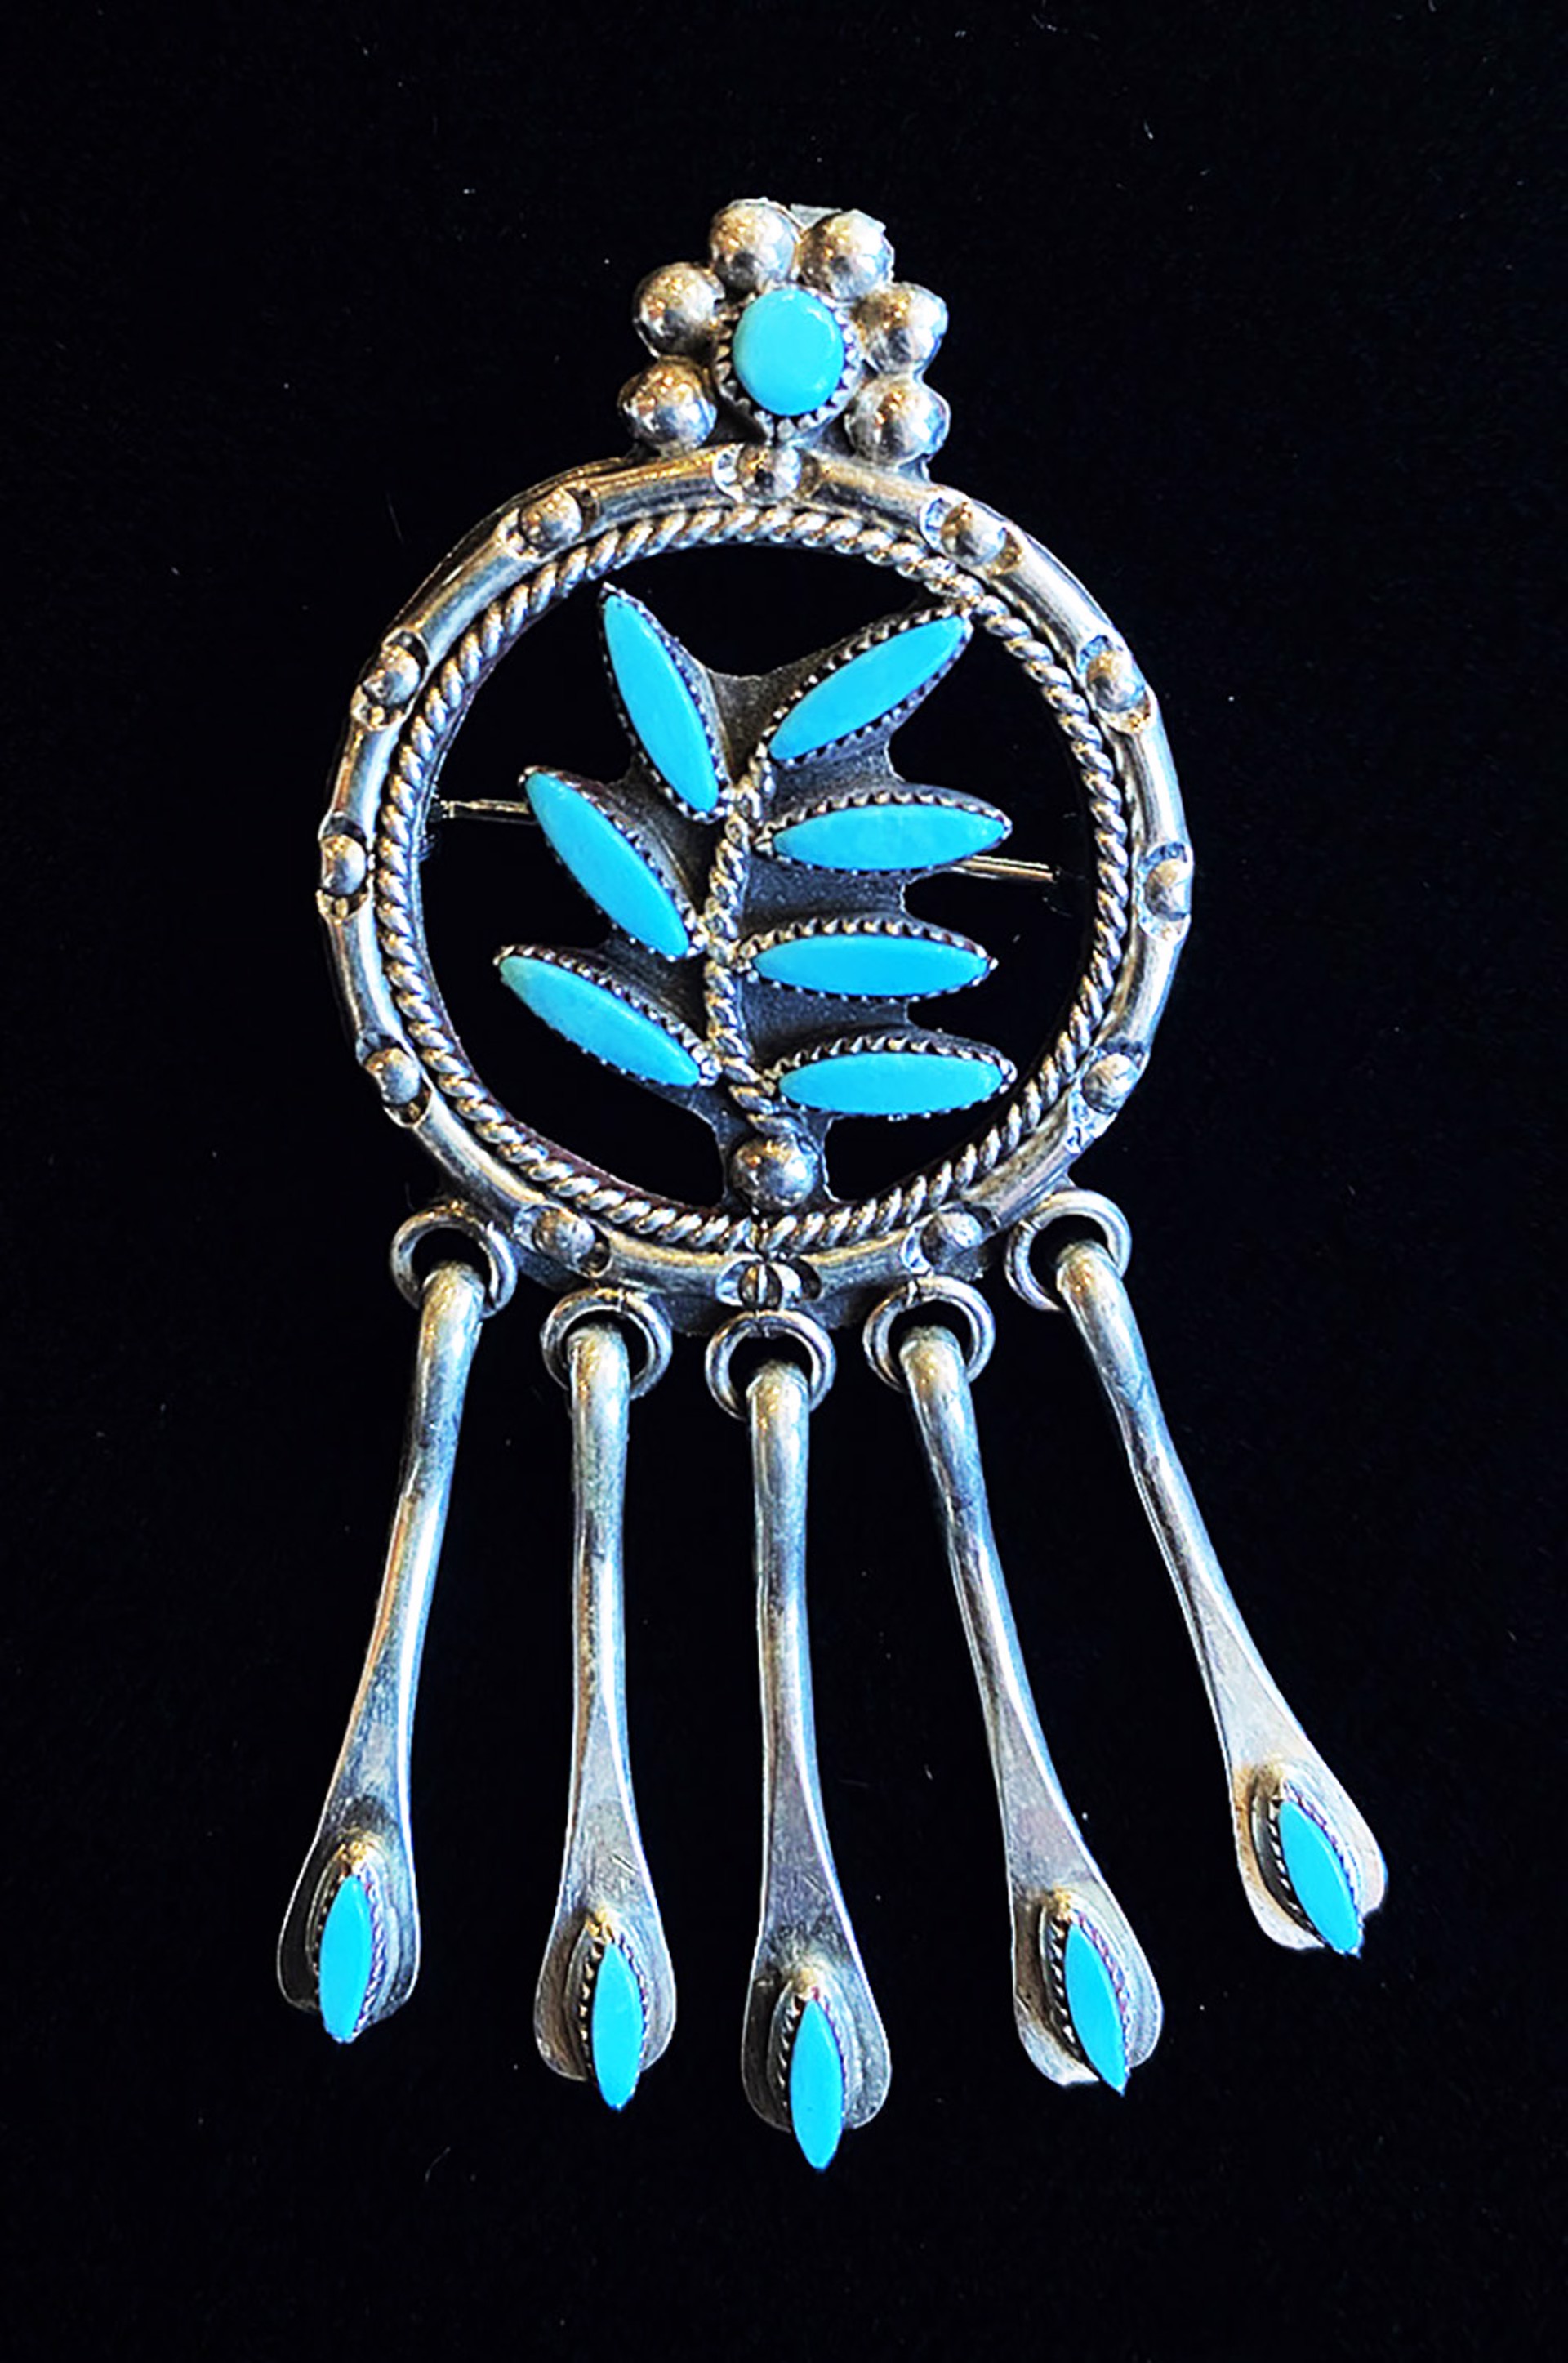 Turquoise Pendant by Artist Unknown